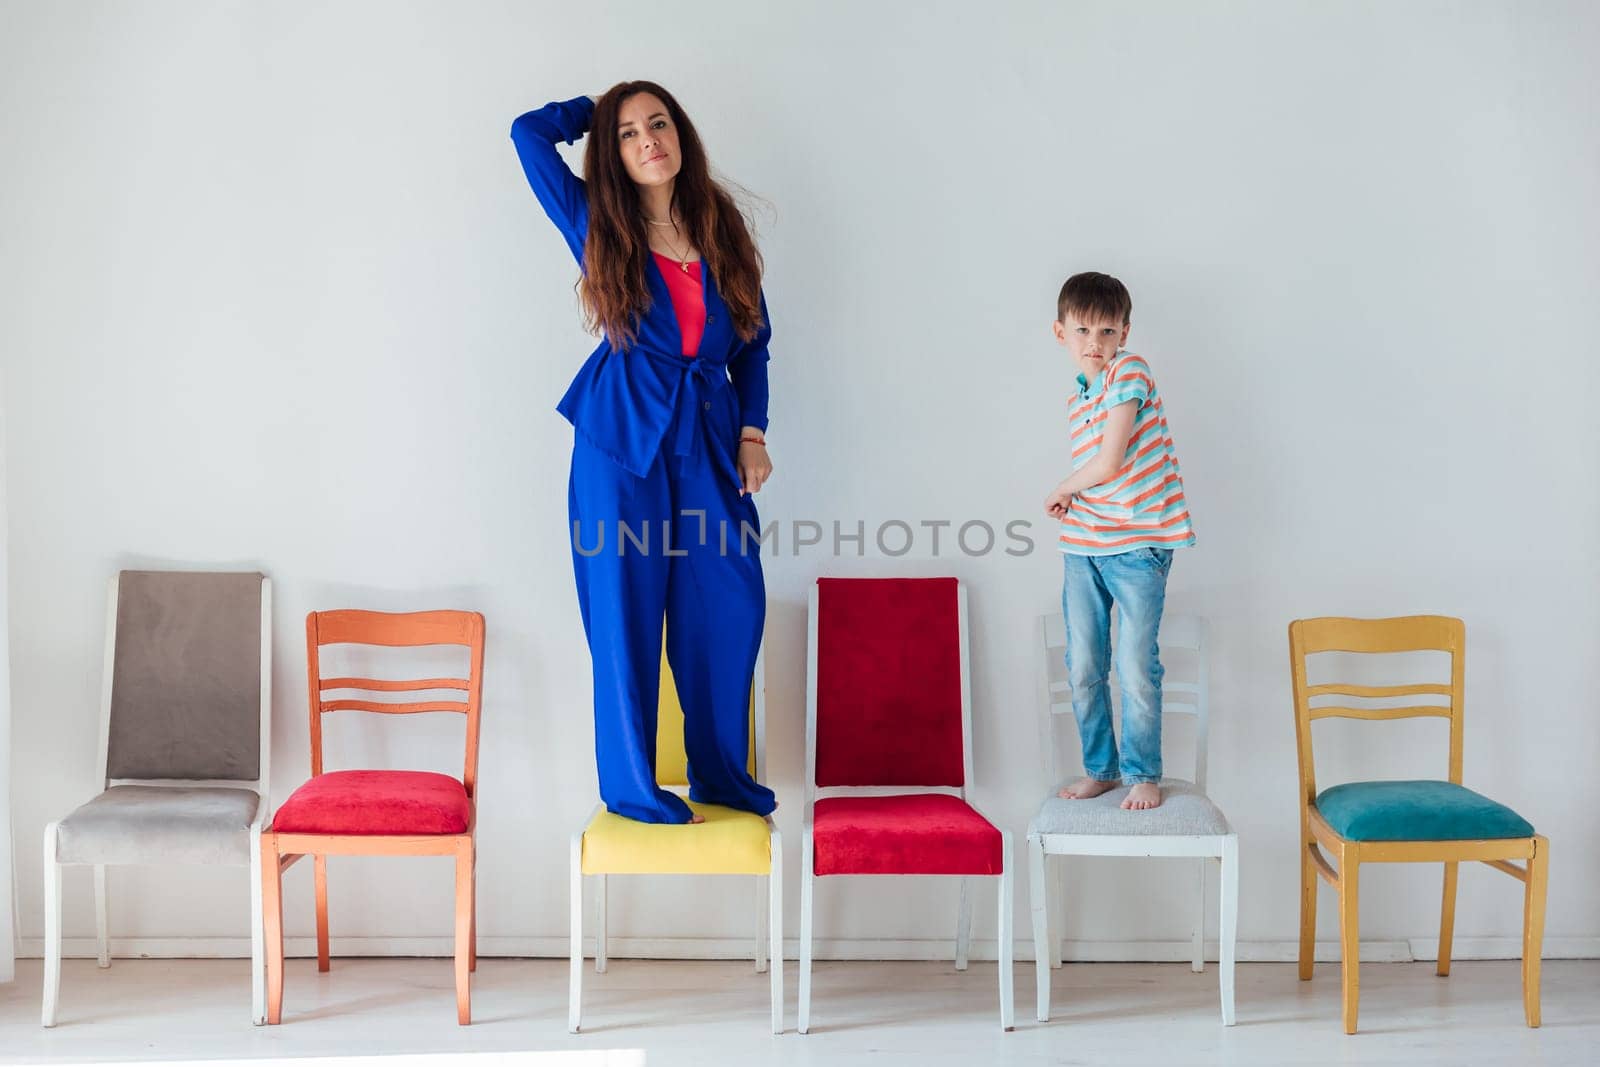 Woman with boy and many chairs